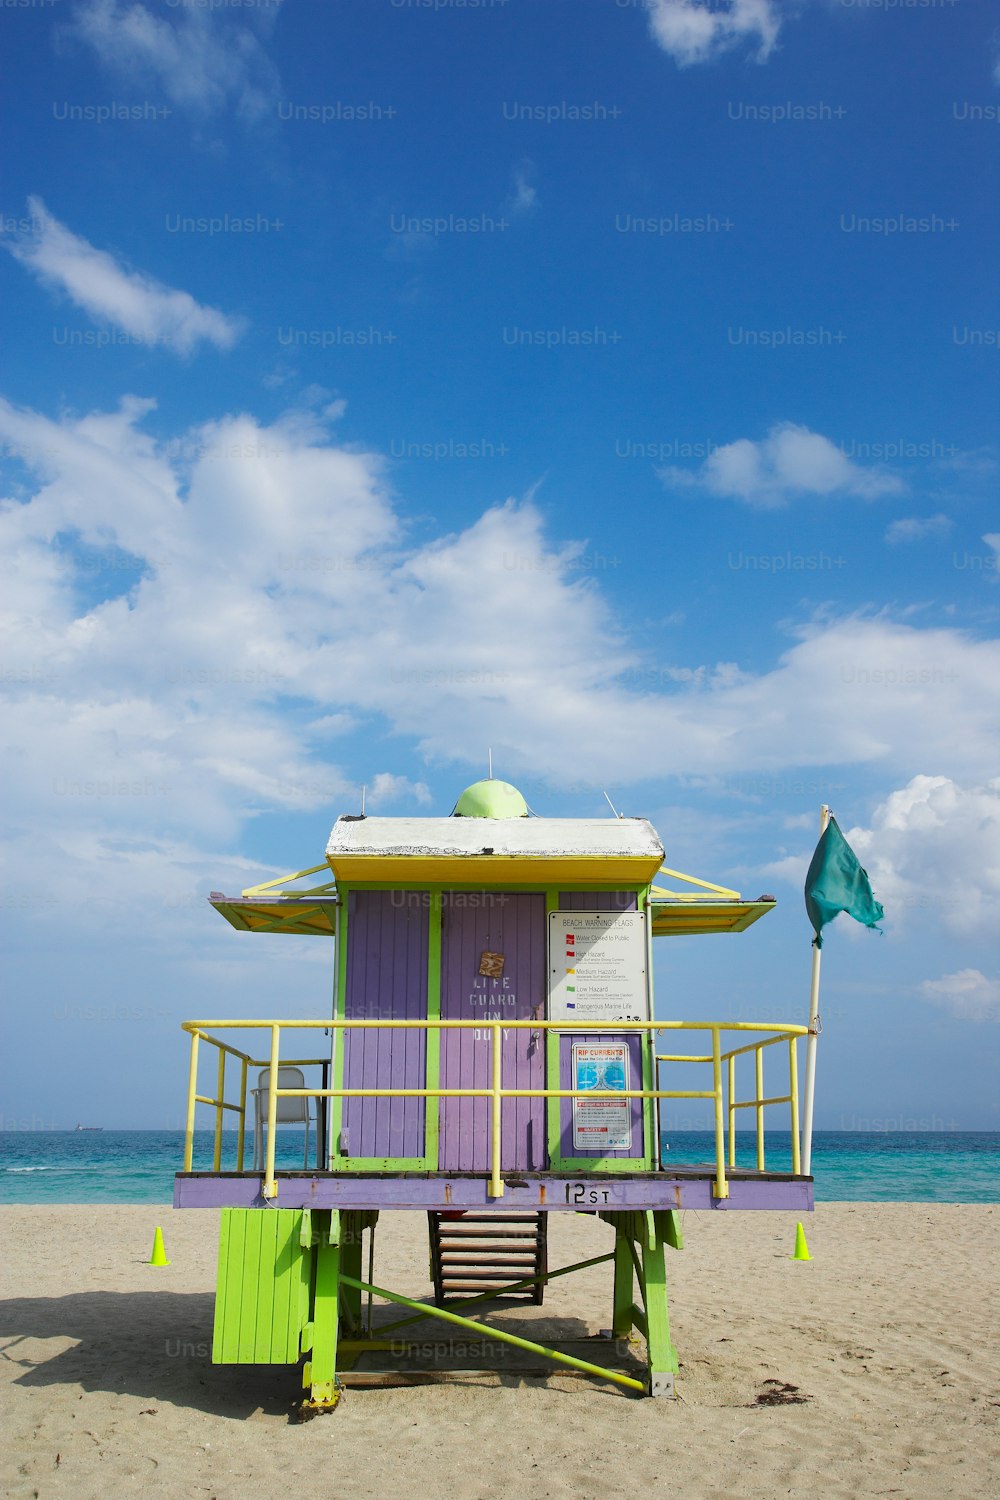 a purple and green life guard stand on a beach